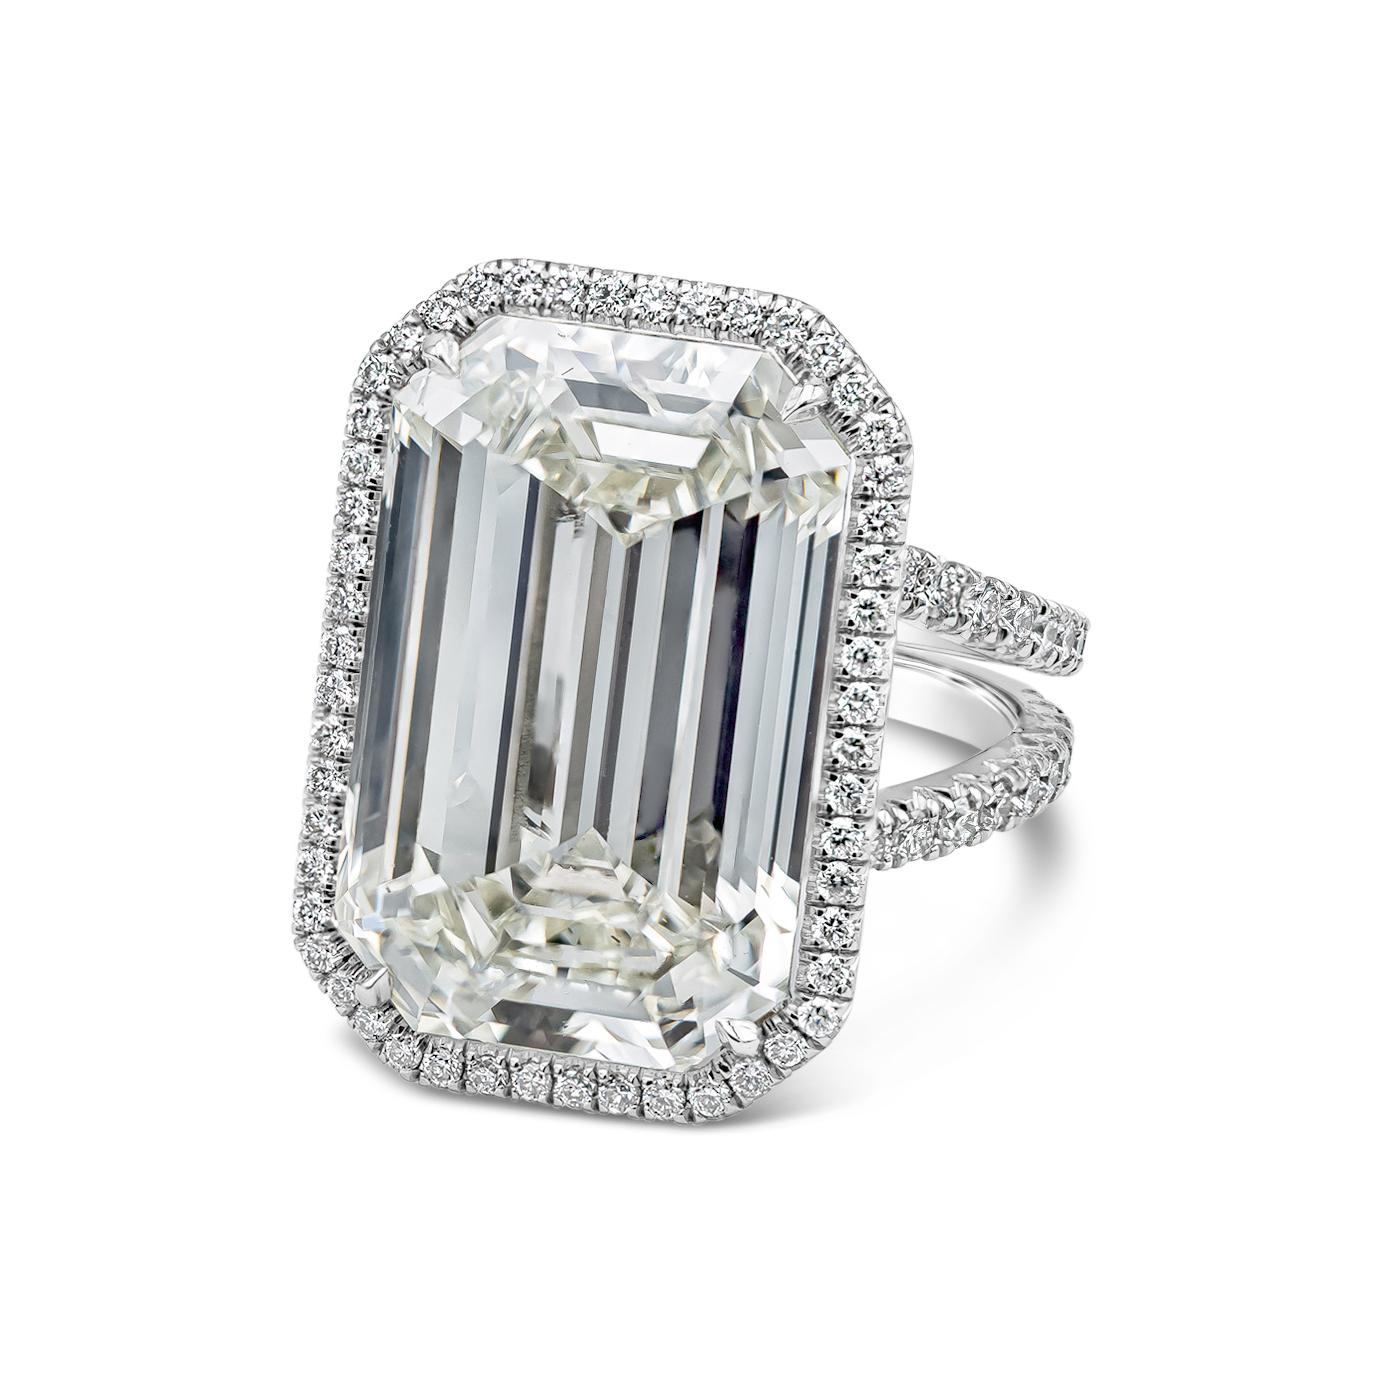 A special and well-crafted ring by Roman Malakov Diamonds featuring a 20.21 carat emerald cut diamond, accented by a thin diamond halo. Set in an intricate design split-shank mounting made in platinum. Accent diamonds weigh 1.10 carats total.